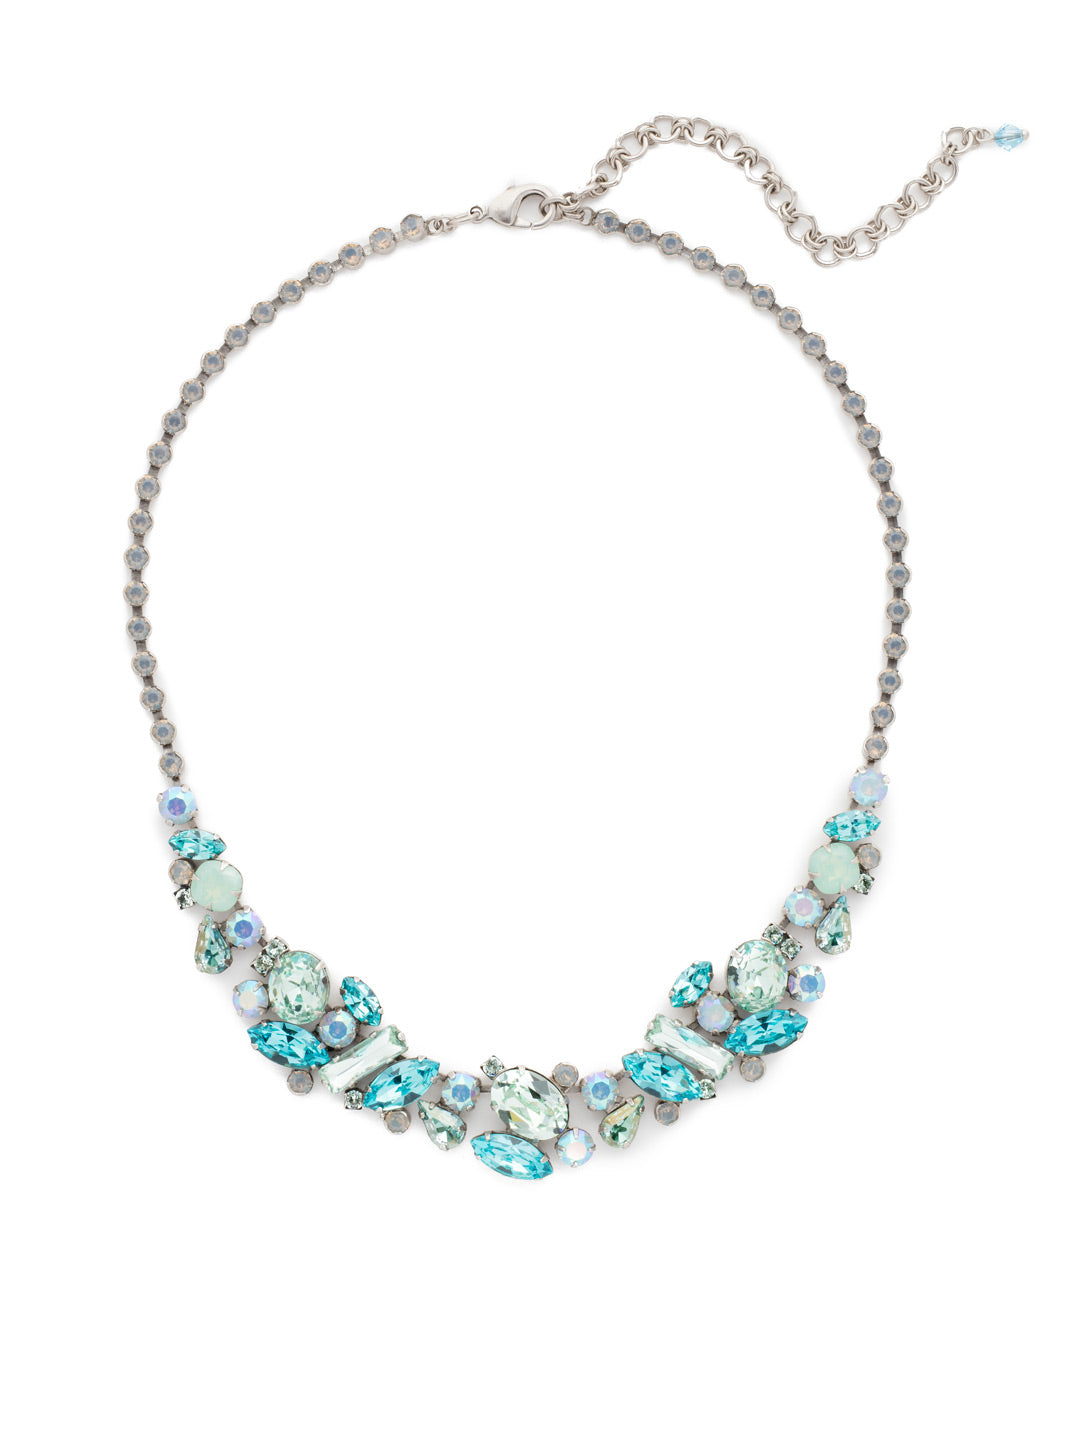 Abstract Crystal Collar Necklace - NDG11ASTT - Stunning clusters of round, navette, pear, oval and cushion cut crystals make this necklace a stand-out by any standards! A rhinestone chain completes this design for all around sparkle.